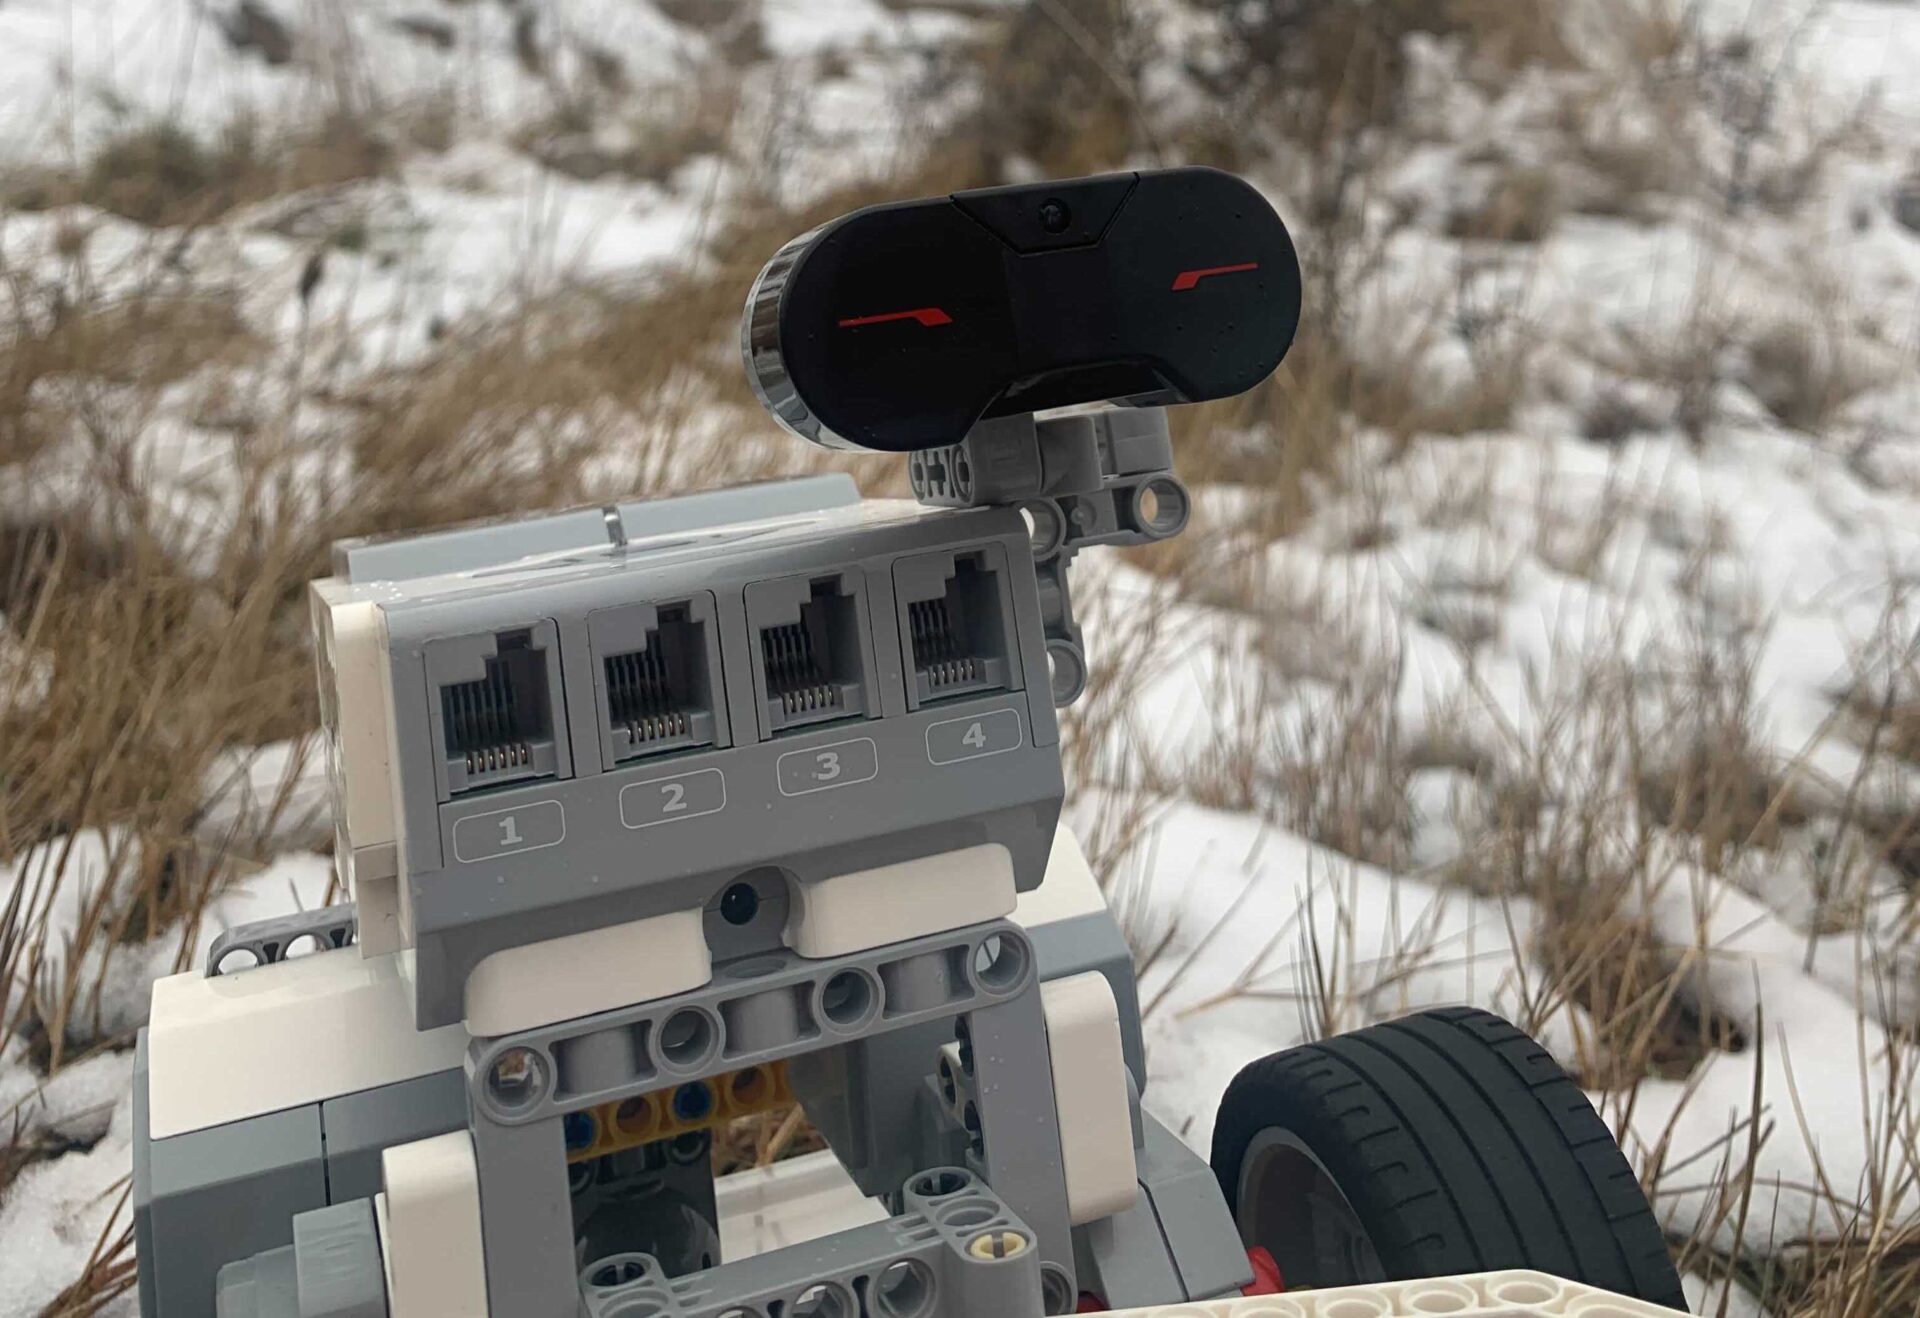 Image of Imagination Station Robots in Cold Places event